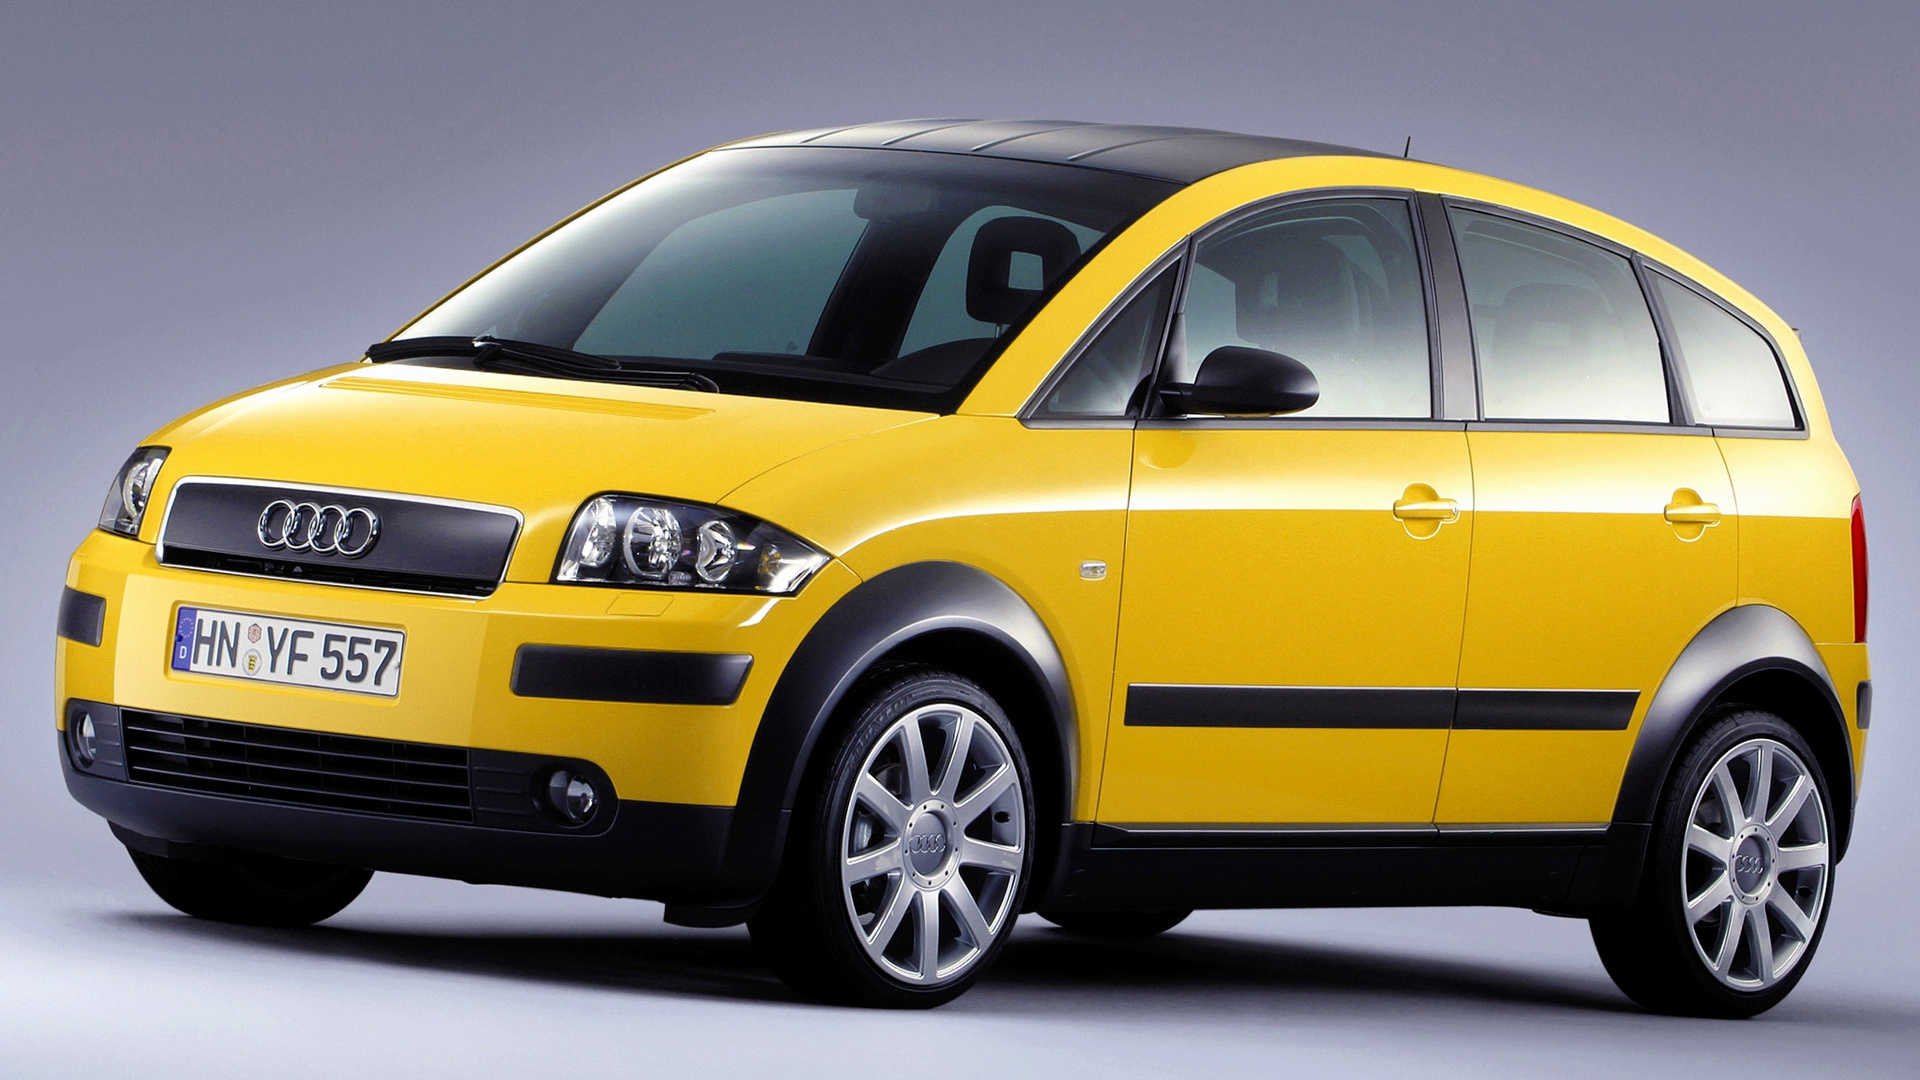 2002 Audi A2 Colour.Storm Wallpapers and HD Images Car